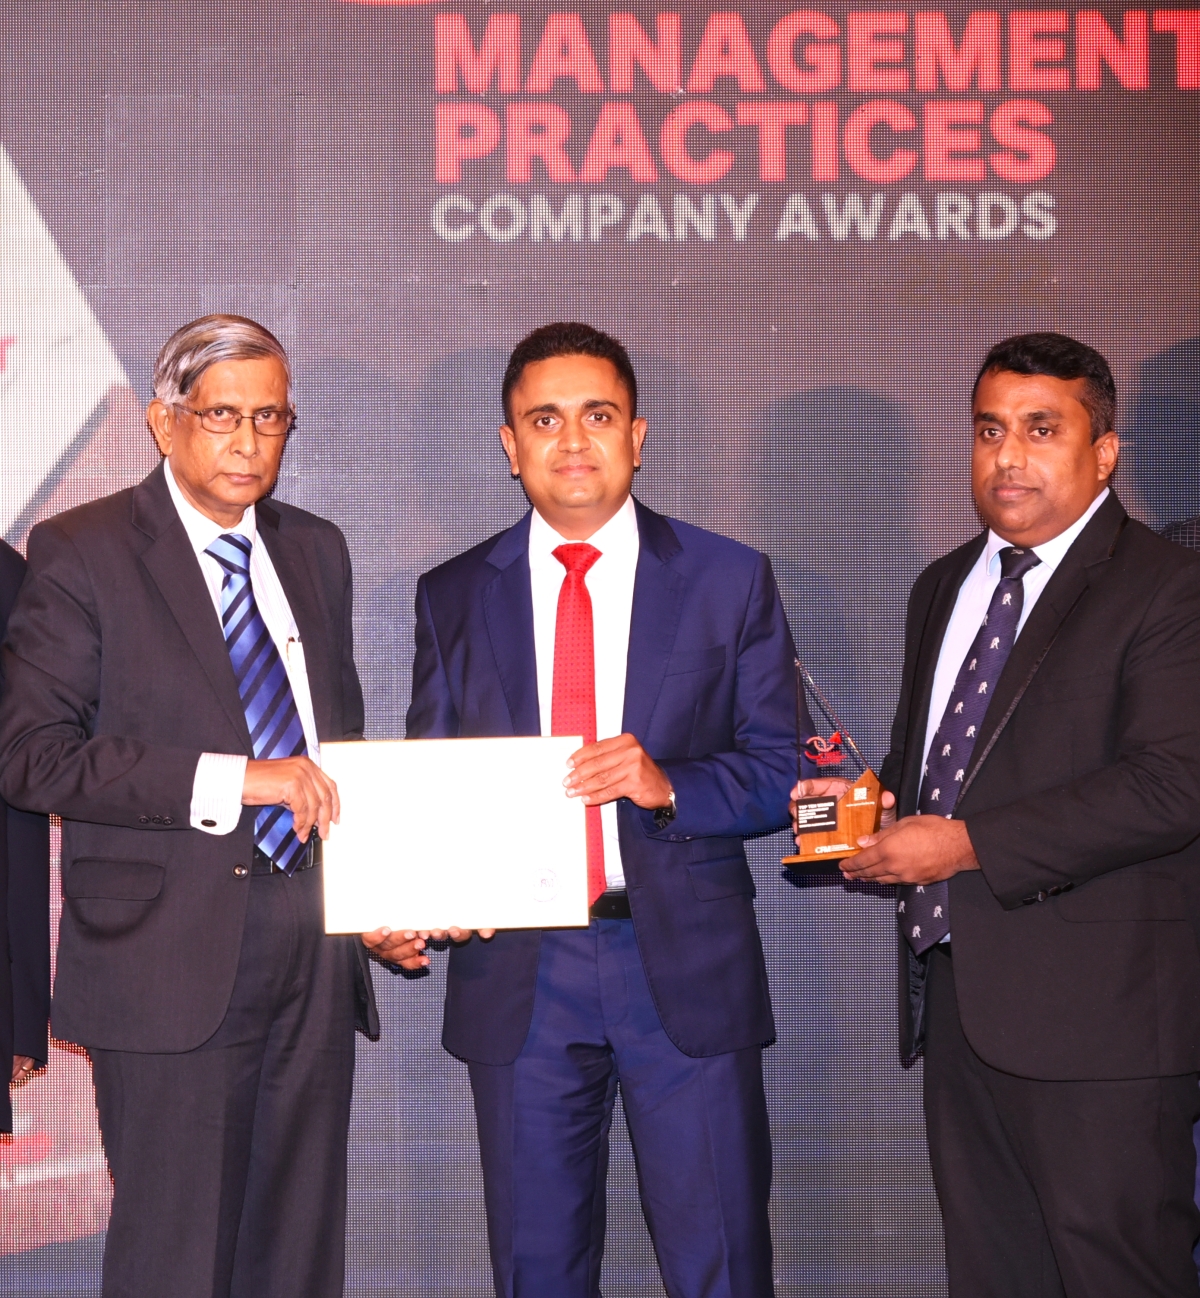 Swisstek Aluminium ranked among CPM’s Top 10 Companies with the ‘Best Management Practices’